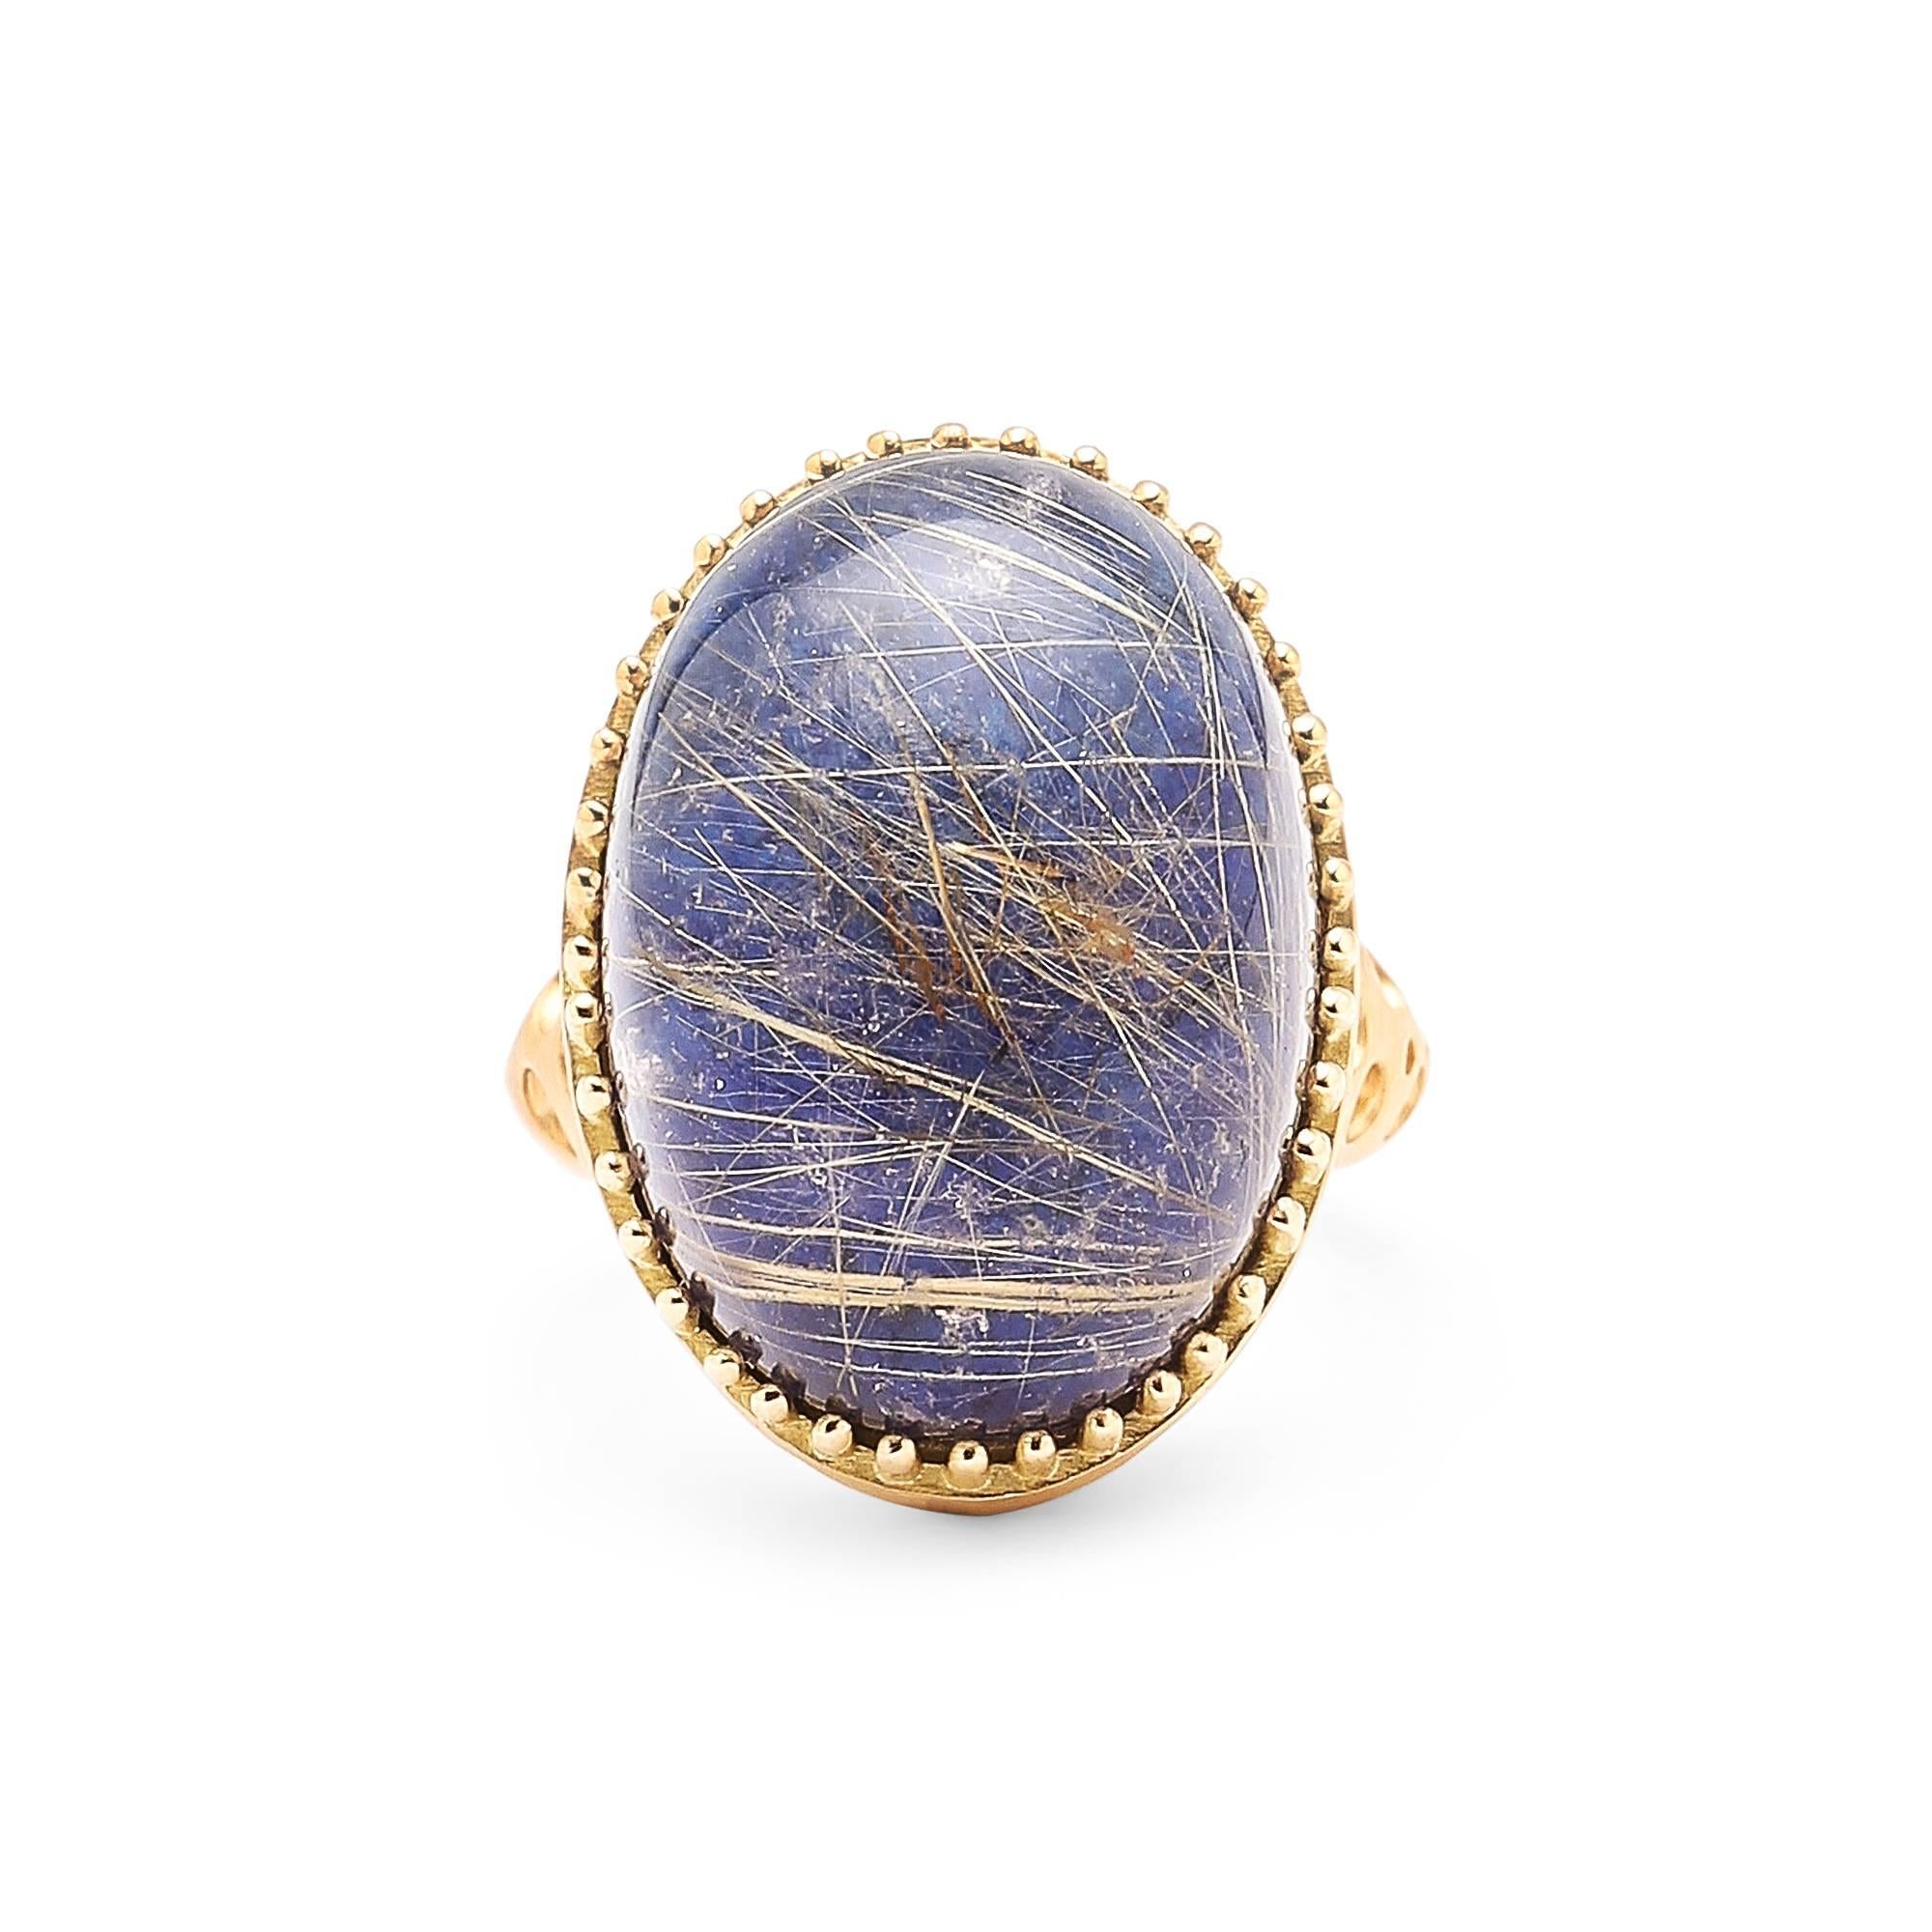 Oval Rutilated Quartz over Lapis Lazuli Doublet Ring with Oculus Band.

This extremely unique gemstone creates an extremely unique, quietly bold and beautiful cocktail ring, that can be worn any time of day or night. Many 18 karat yellow gold prongs